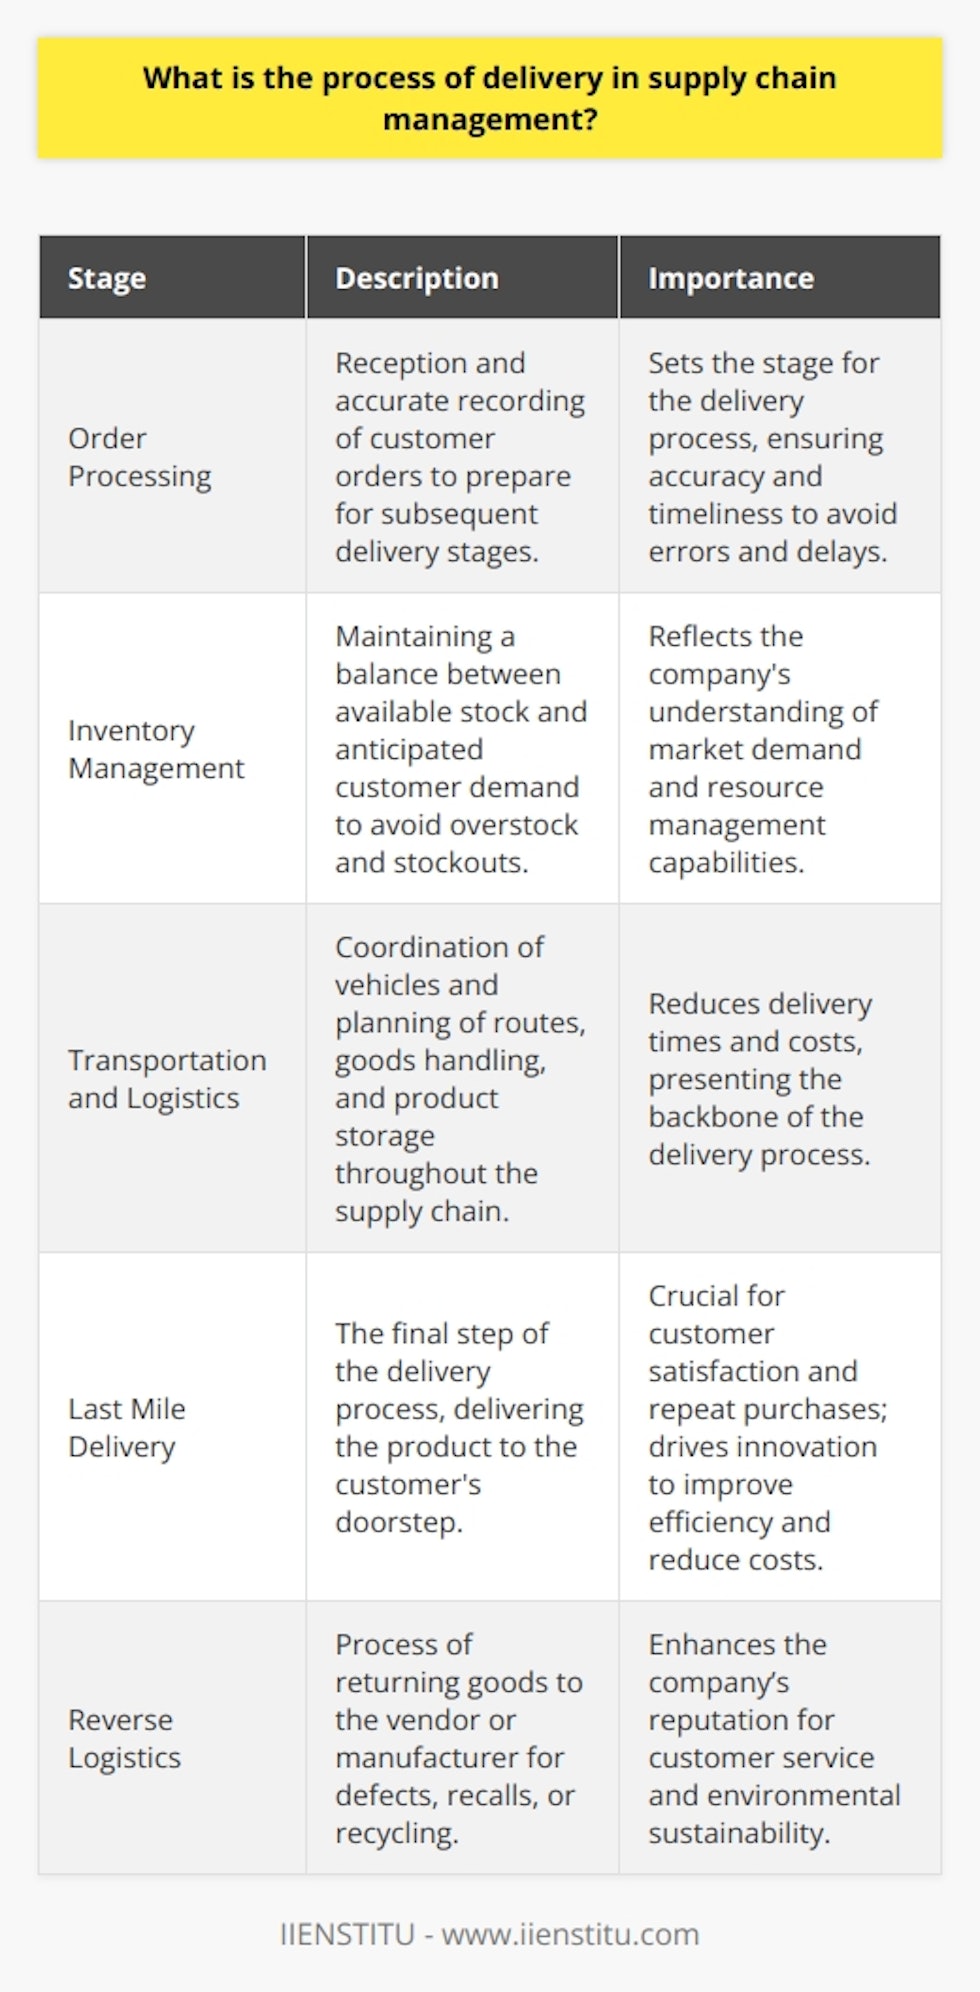 The delivery process in the realm of supply chain management is a sophisticated sequence of operations that ensure goods reach the customer efficiently and satisfactorily. It's a multifaceted procedure that can make or break customer loyalty and determines how a business is perceived in the marketplace.Order Processing: The Launch Pad of Delivery OperationsOrder processing is the initial phase of the delivery process where the accuracy and timeliness set the stage for all subsequent actions. This involves the reception of customer orders, accurate recording, and preparation for the next steps of the delivery process. It is vital in order processing to verify details to prevent errors that can cause delays and customer dissatisfaction.Inventory Management: Balancing Act of Availability and DemandThe pulse of order fulfillment, inventory is managed to consistently maintain an equilibrium between stock availability and predicted customer demand. This balance is the cornerstone of avoiding situations of overstock, which can result in additional storage costs, or stockouts, which can lead to lost sales and customer discontent. Inventory management is reflective of how well a company understands its market demand and manages its resources.Transportation and Logistics: The Wheels of the Supply ChainTransportation refers to the choice and coordination of vehicles that transfer the goods from one point to another throughout the supply chain. Logistics, on the other hand, is the overarching network that involves planning routes, handling goods, and storing products effectively. This is the skeleton of the delivery process, as strong logistics and transportation strategies can substantially reduce delivery times and costs.Last Mile Delivery: The Make-or-Break MomentThe term last mile delivery refers to the final journey of the product to the customer's doorstep. This is a crucial touchpoint with the customer and affects their overall satisfaction and likelihood to return for future purchases. Businesses strive for innovation in this area, seeking cost-effective and swift options to delight customers.Reverse Logistics: Closing the LoopAn often overlooked but increasingly important aspect is reverse logistics, wherein goods are returned to the vendor or manufacturer in cases of defects, recalls, or for recycling purposes. A seamless reverse logistics process contributes positively to a company's reputation by demonstrating commitment to customer service and environmental sustainability.Each of these stages collectively forms the backbone of the supply chain's delivery process, integrating the flow of goods from suppliers to customers. Mastering these aspects not only meets the immediate objective of timely deliveries but also strengthens the customer-business relationship, which is invaluable in today’s competitive environment.